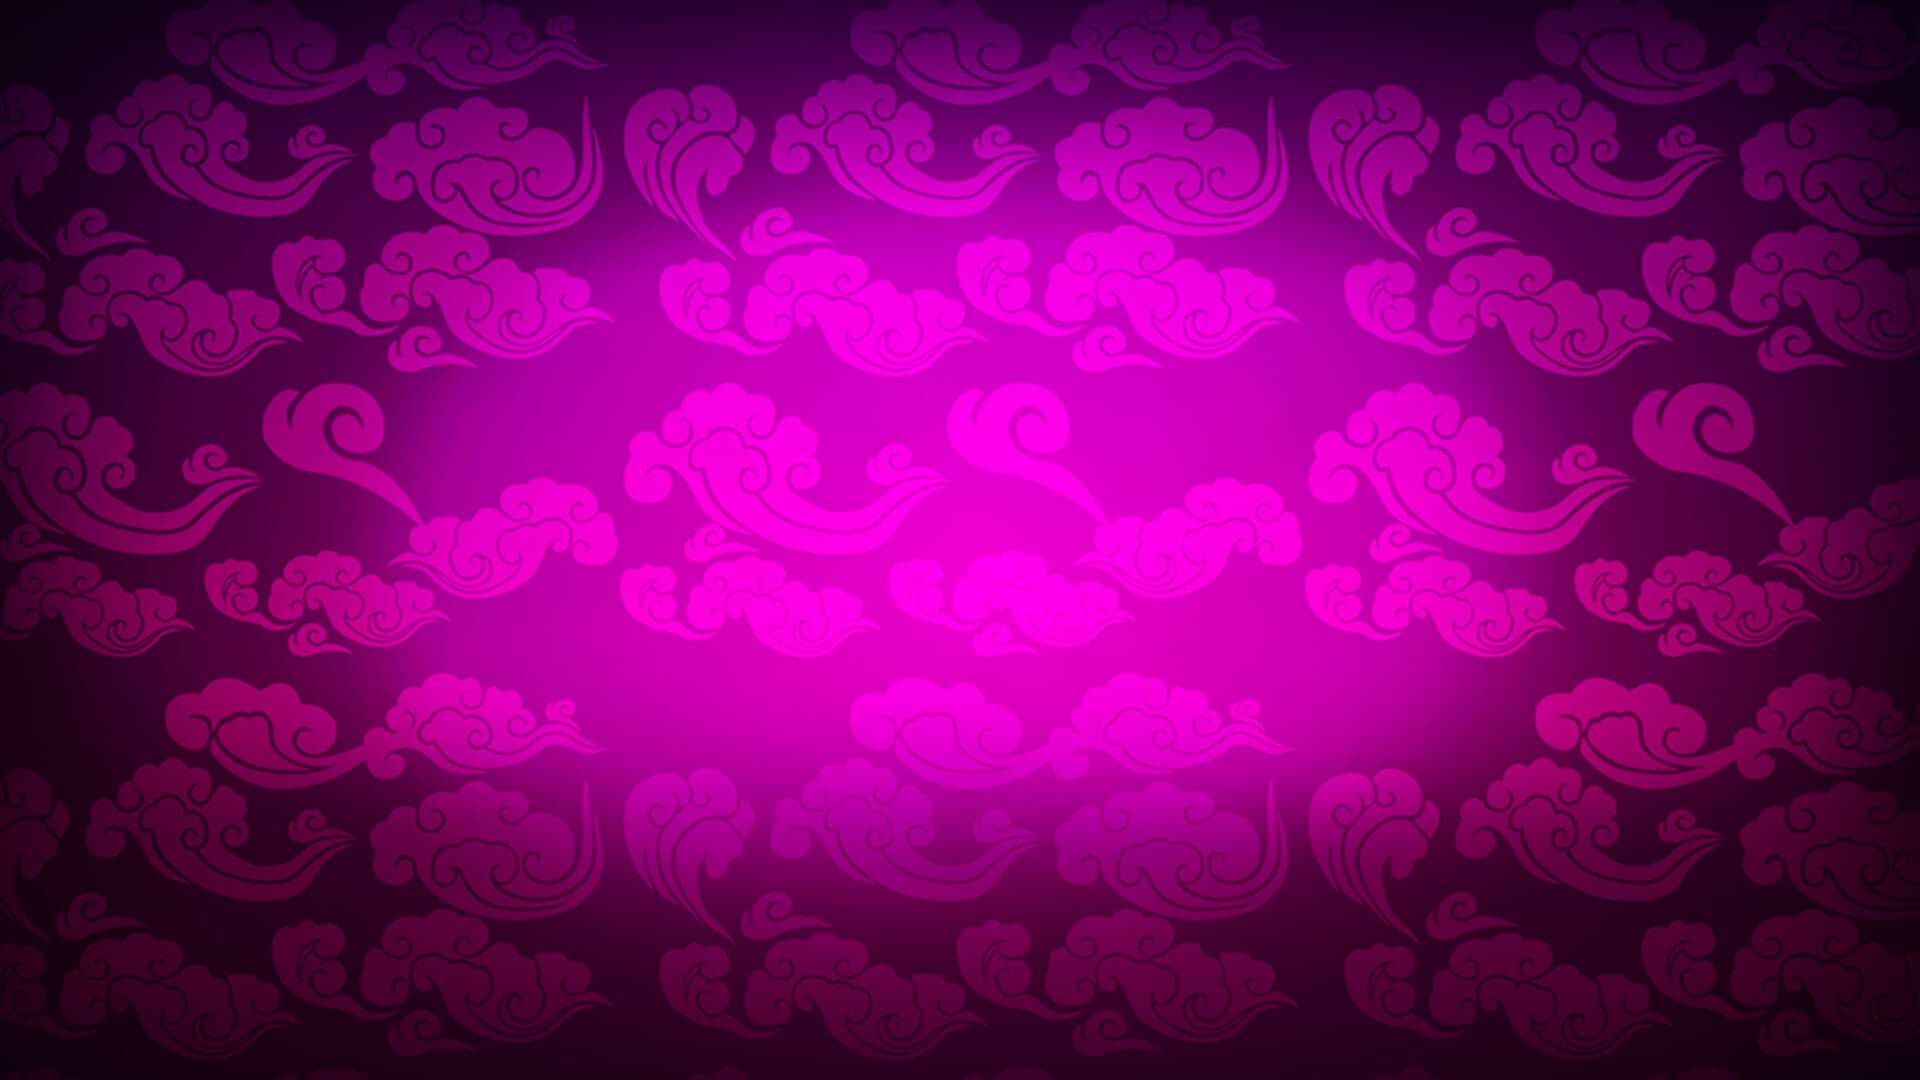 Game hight resolution background Dragon Pearls